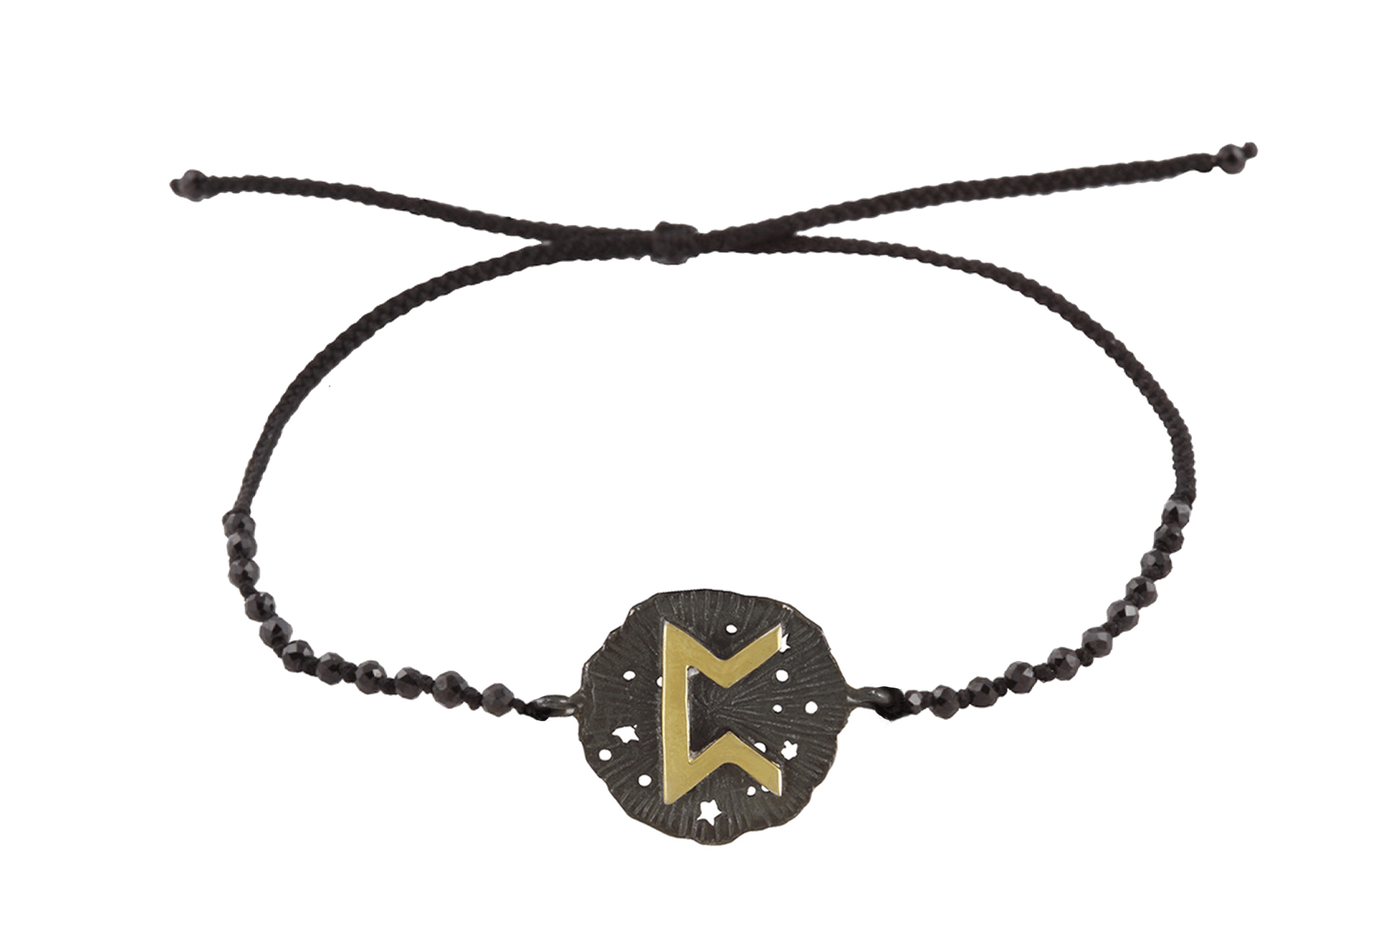 Runic medallion amulet Perth bracelet with beads. Gold plated and oxide